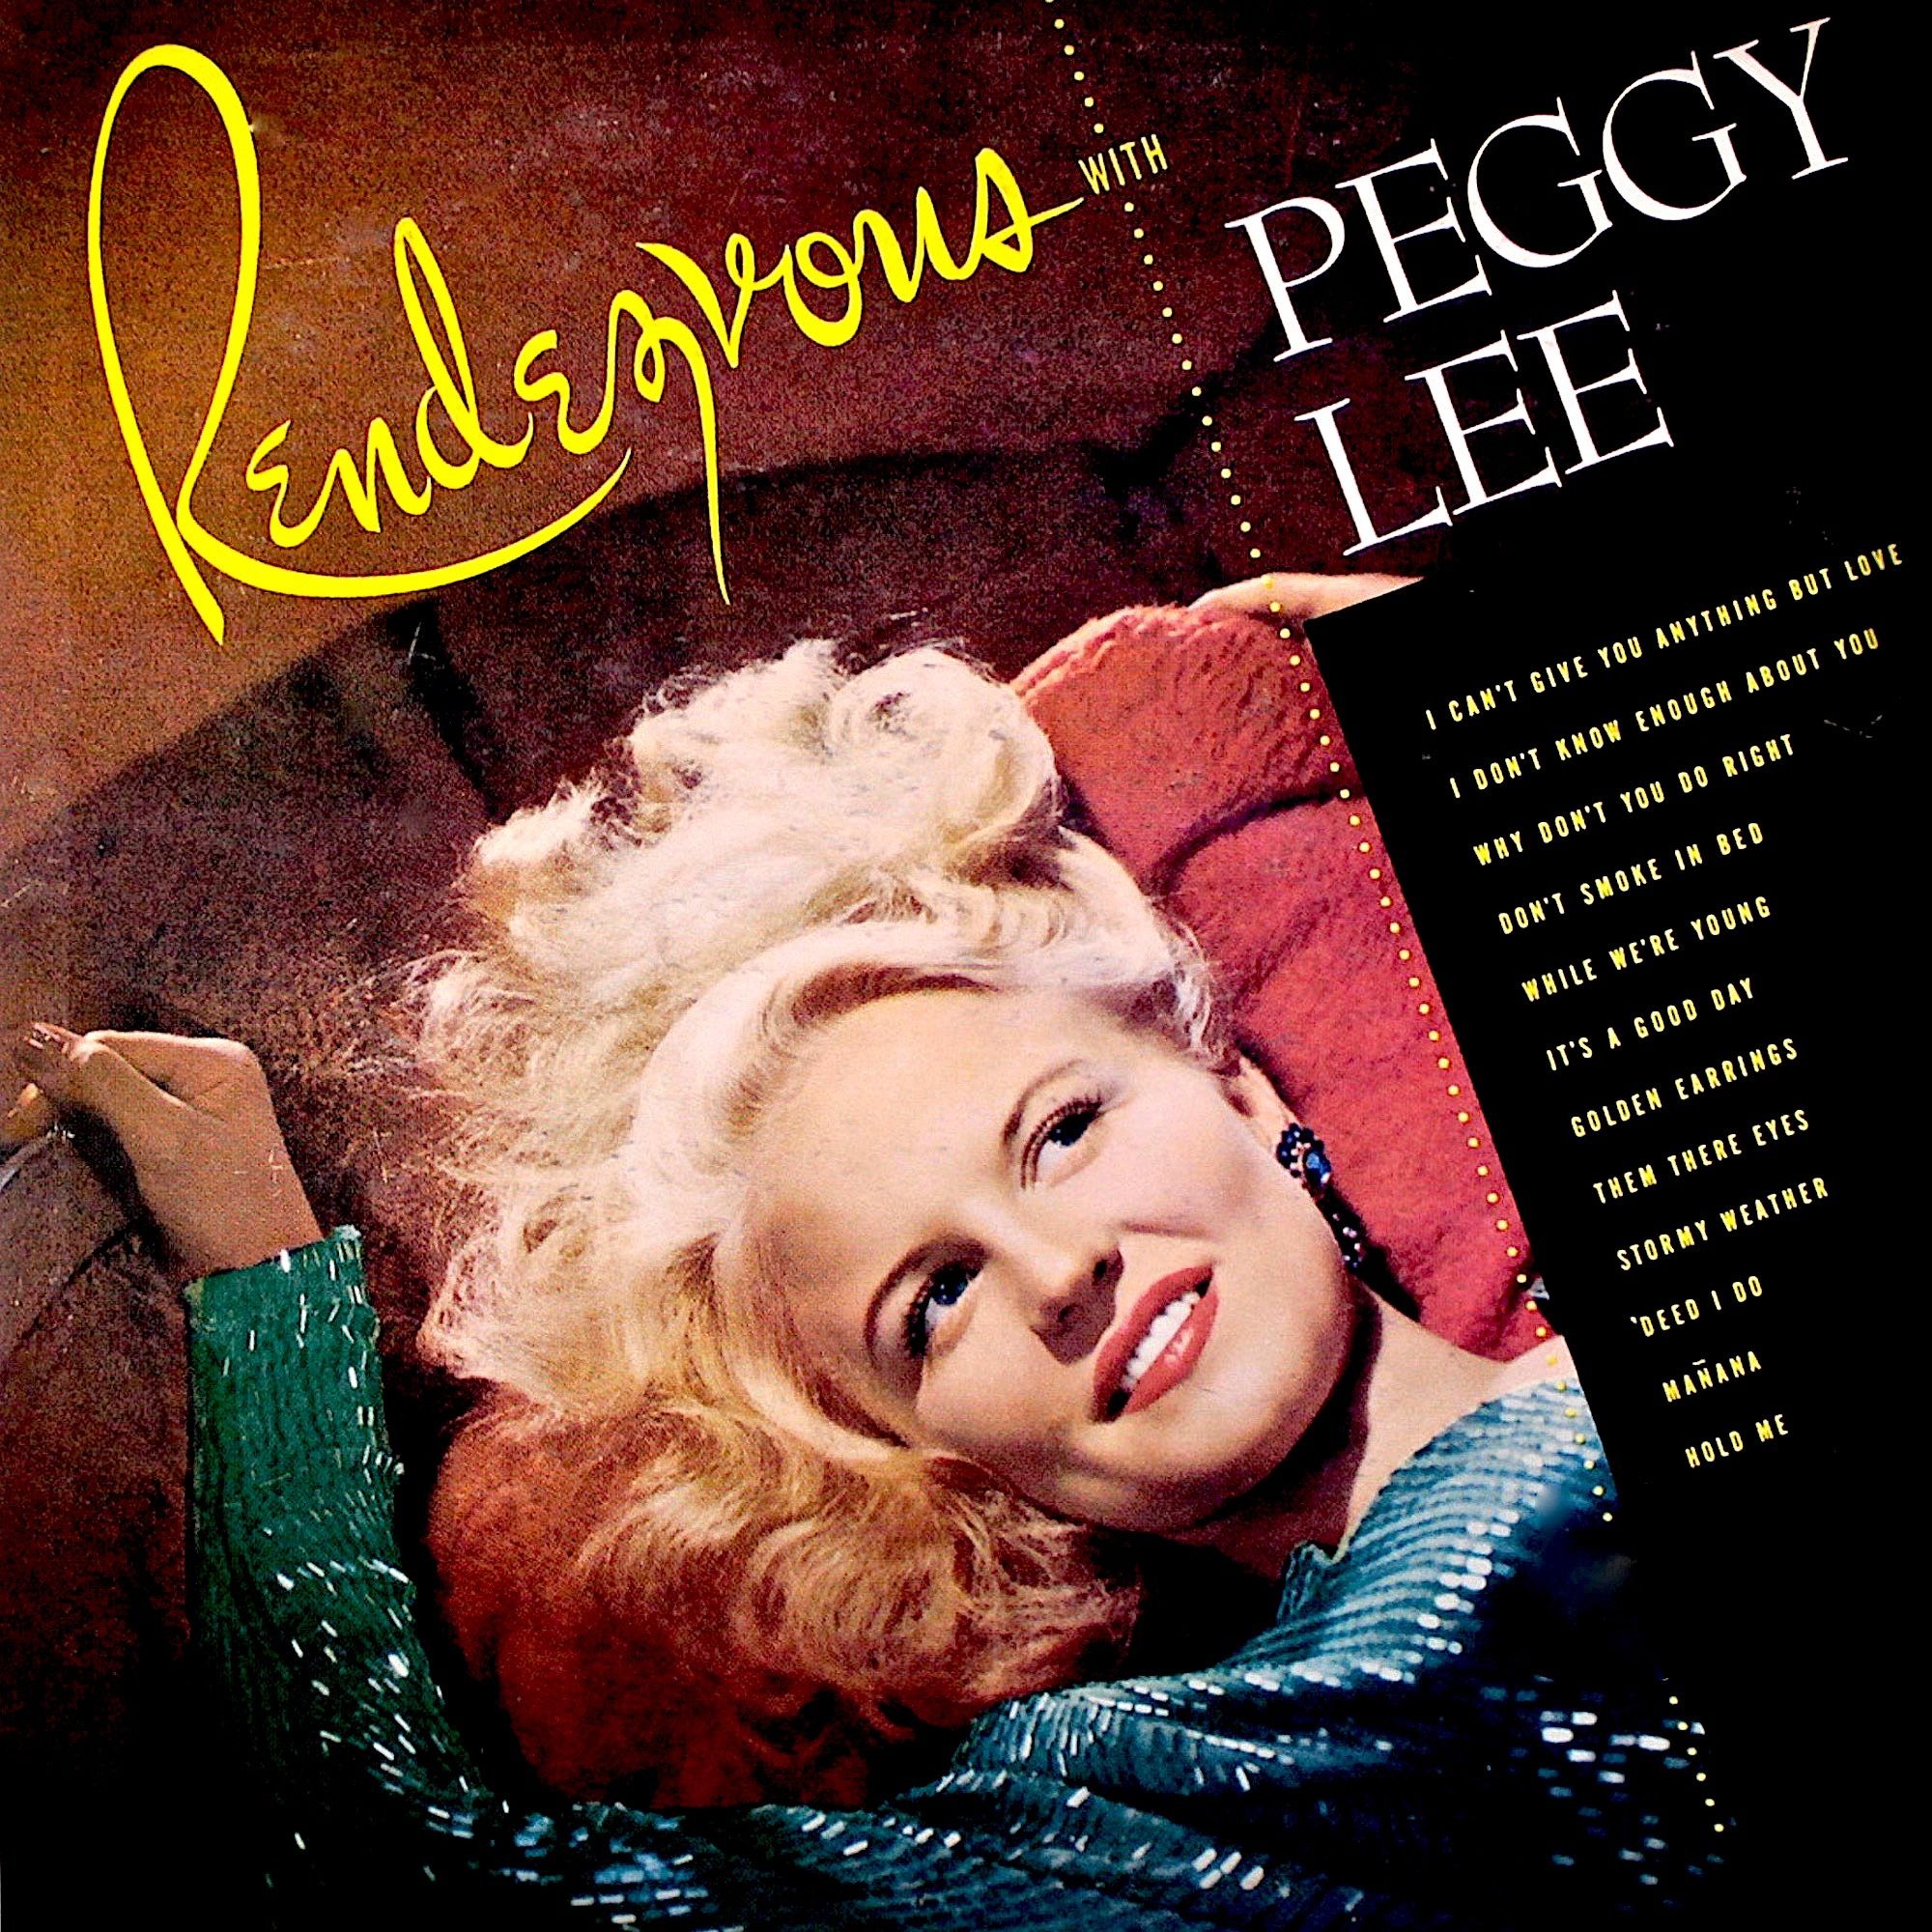 Peggy Lee - Rendezvous With Peggy Lee (Remastered) (2020) [FLAC 24bit/44,1kHz]